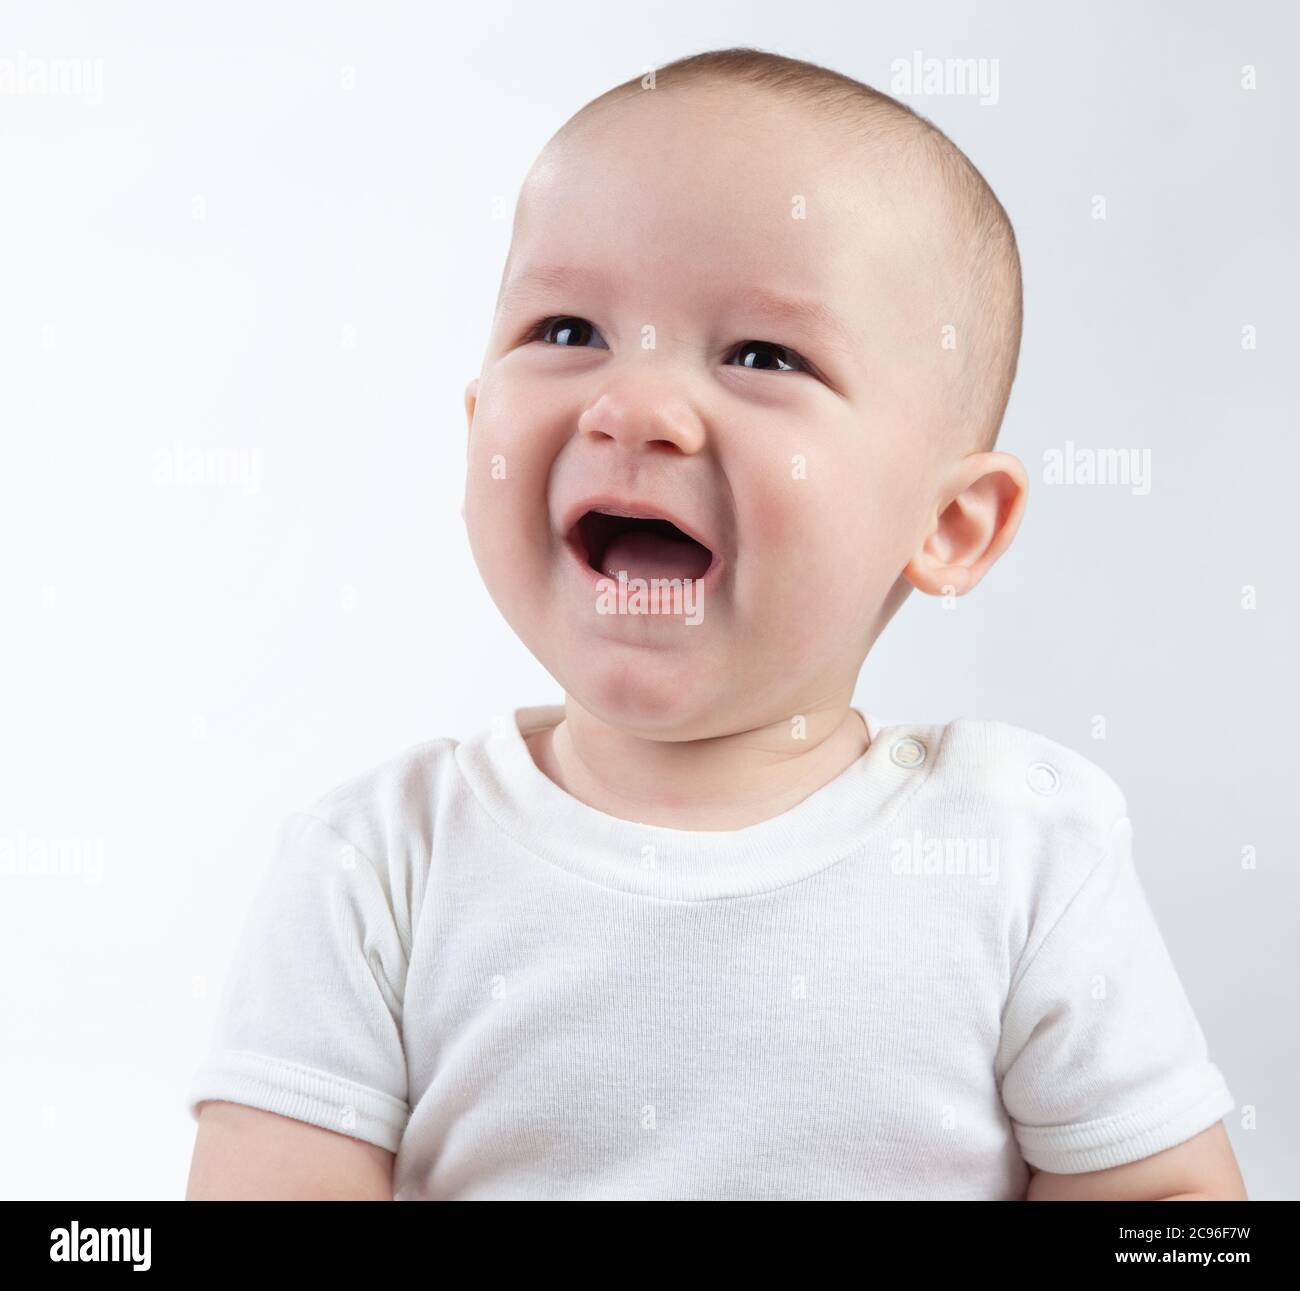 Portrait of unhappy nine-month-old baby on a white background Stock Photo